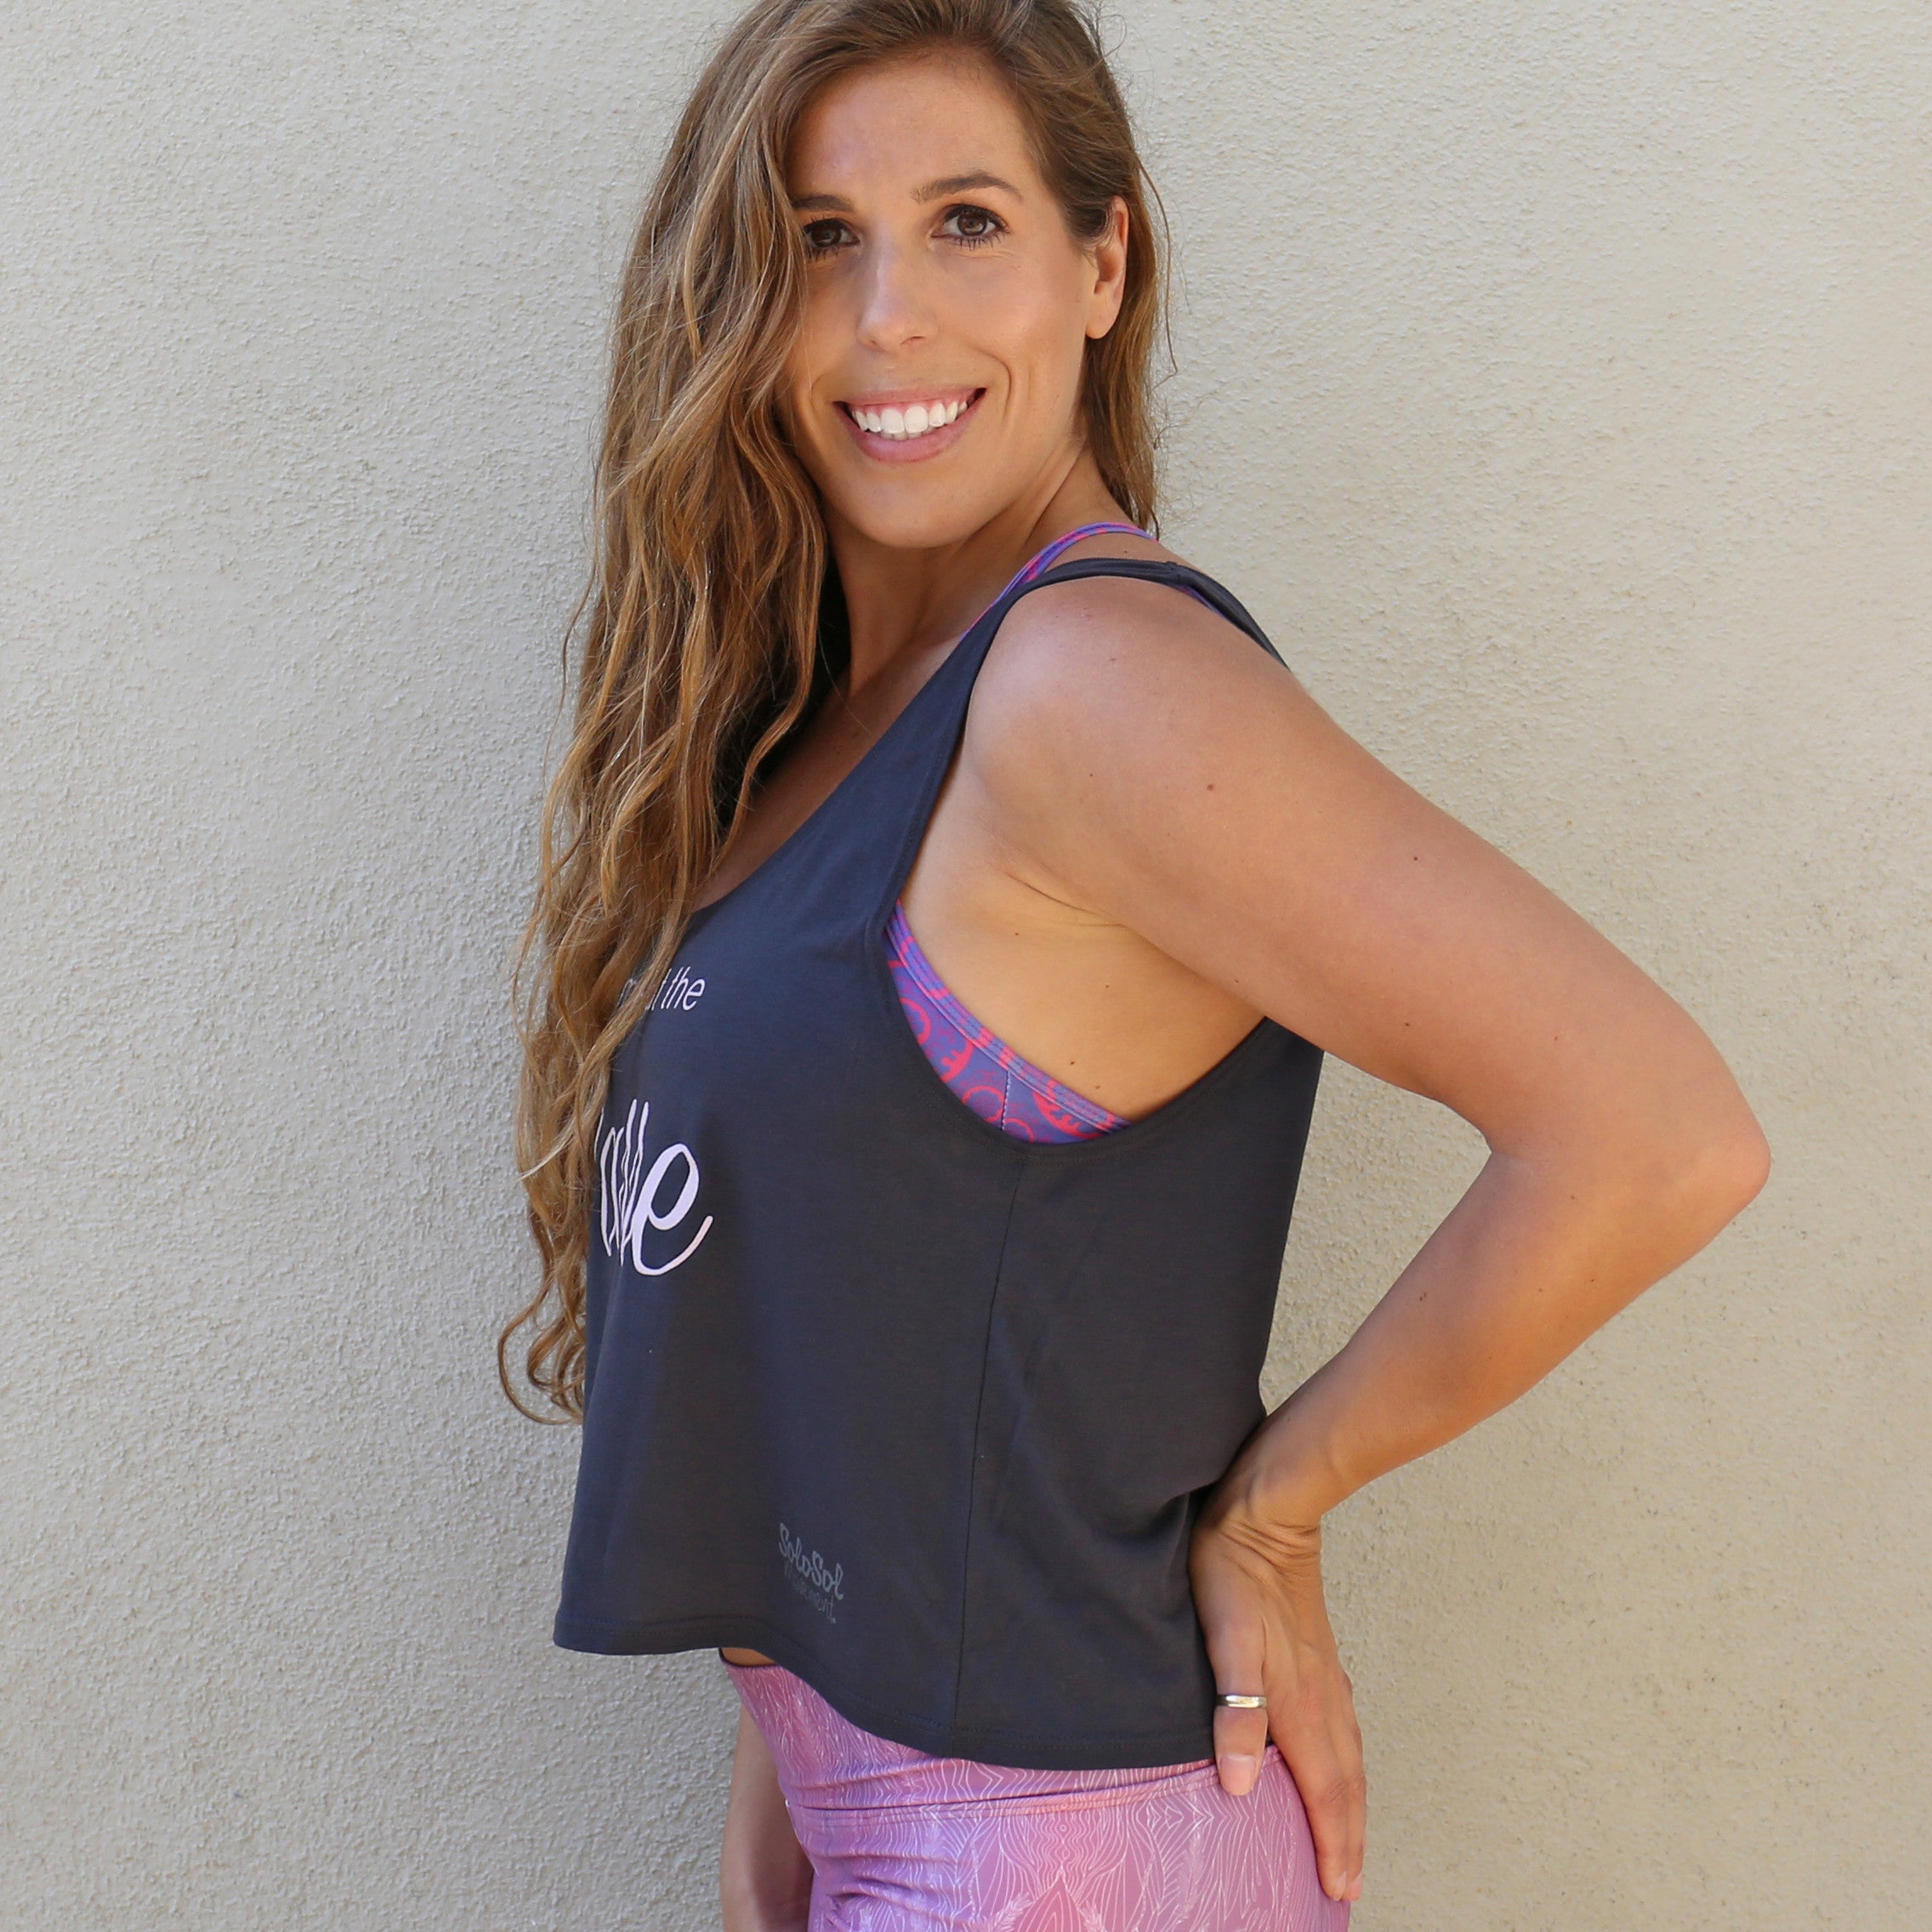 Graphic Tank "Meet Me At The Barre" Charcoal Grey